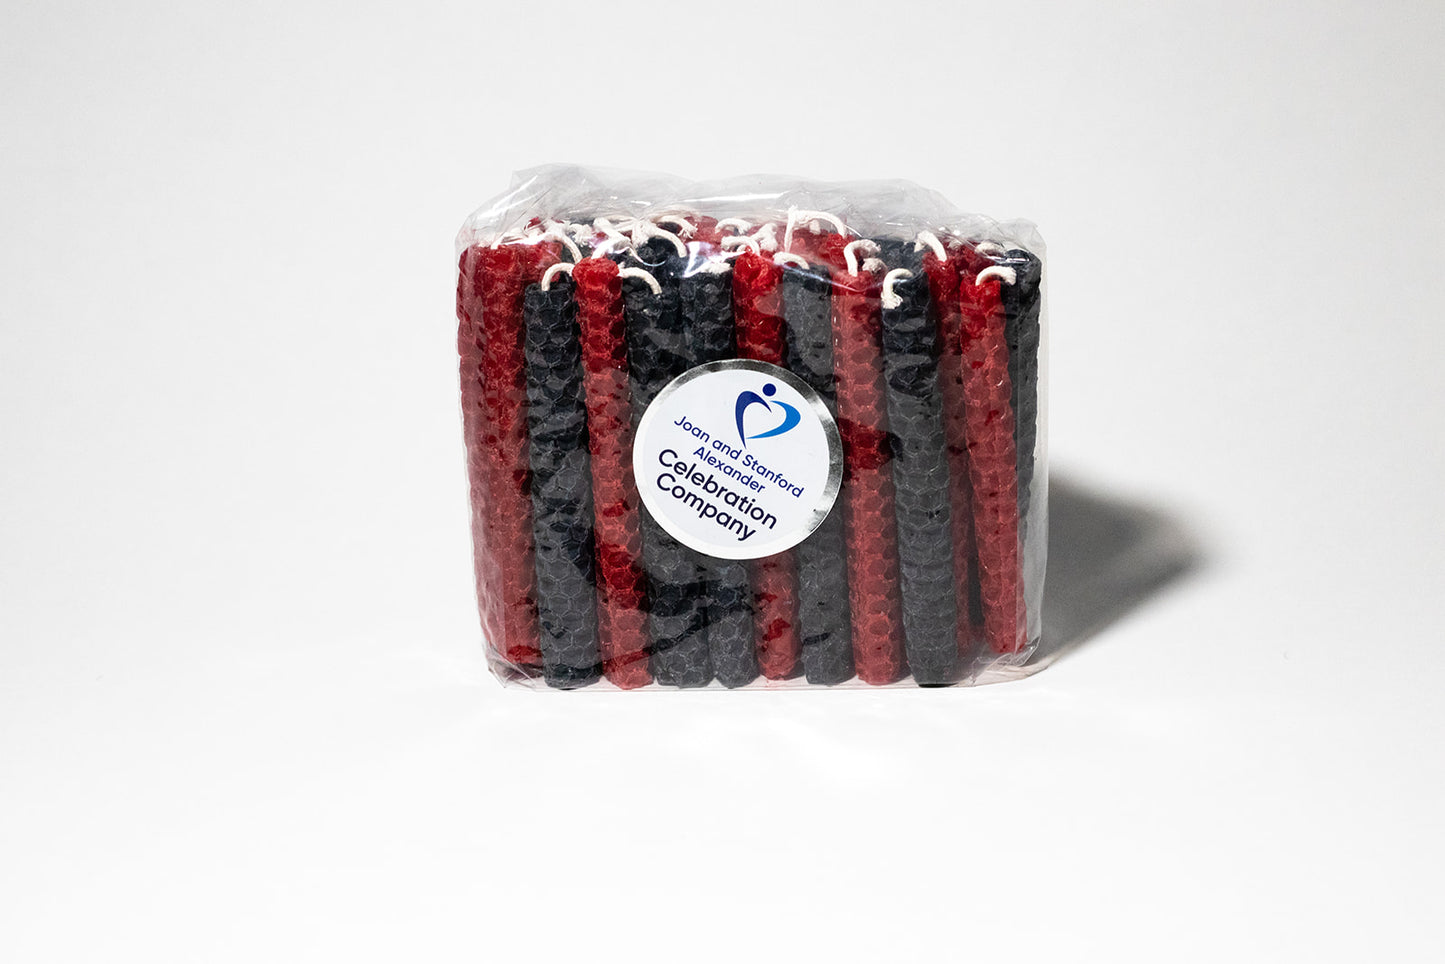 Package of 44 Chanukah candles in red and black.